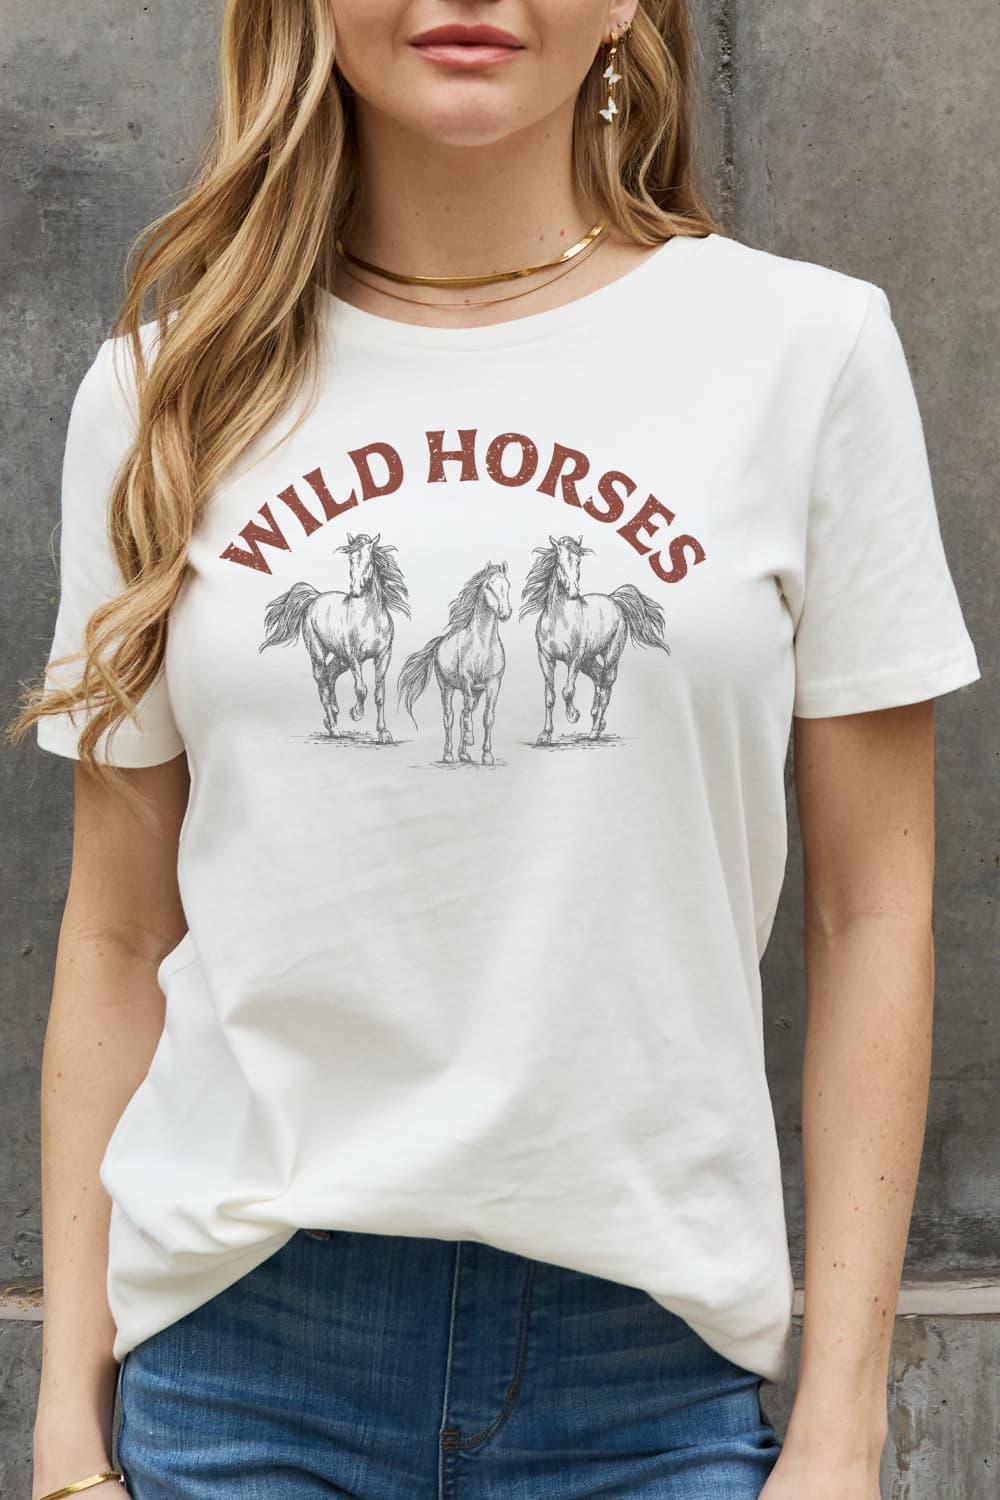 Simply Love WILD HORSES Graphic Cotton T-Shirt